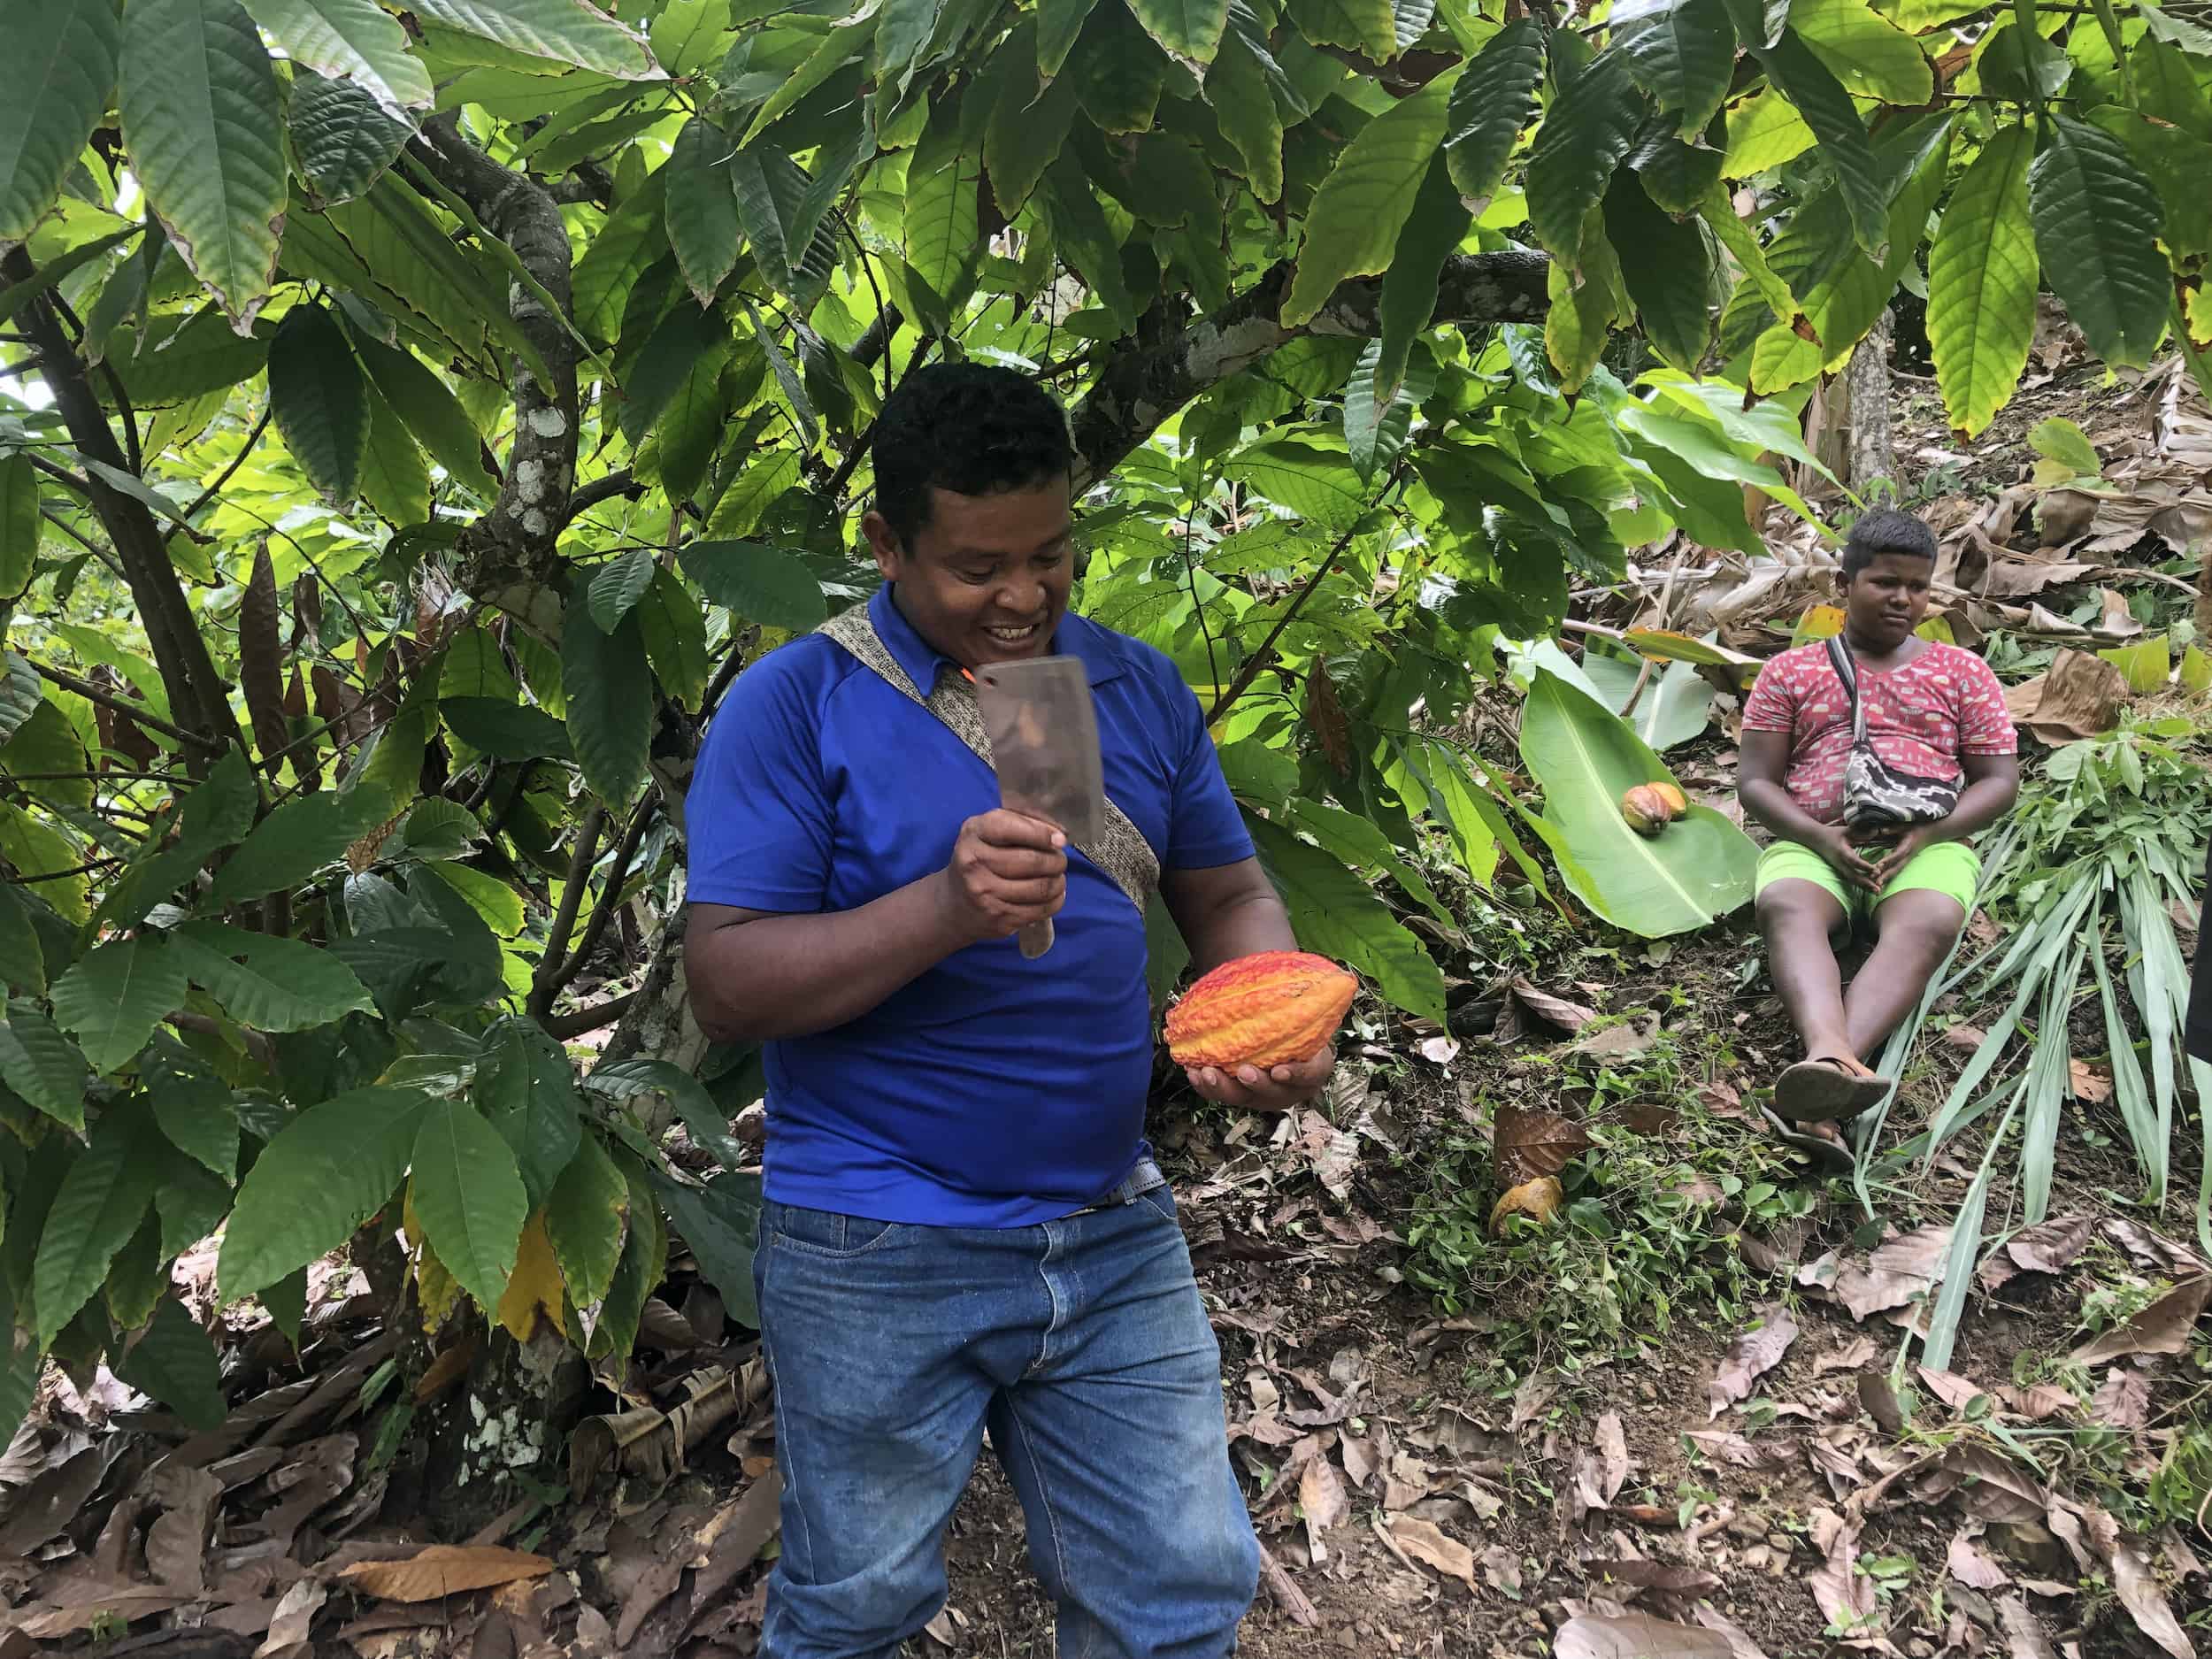 The farmer cutting open a cacao pod on the cacao tour